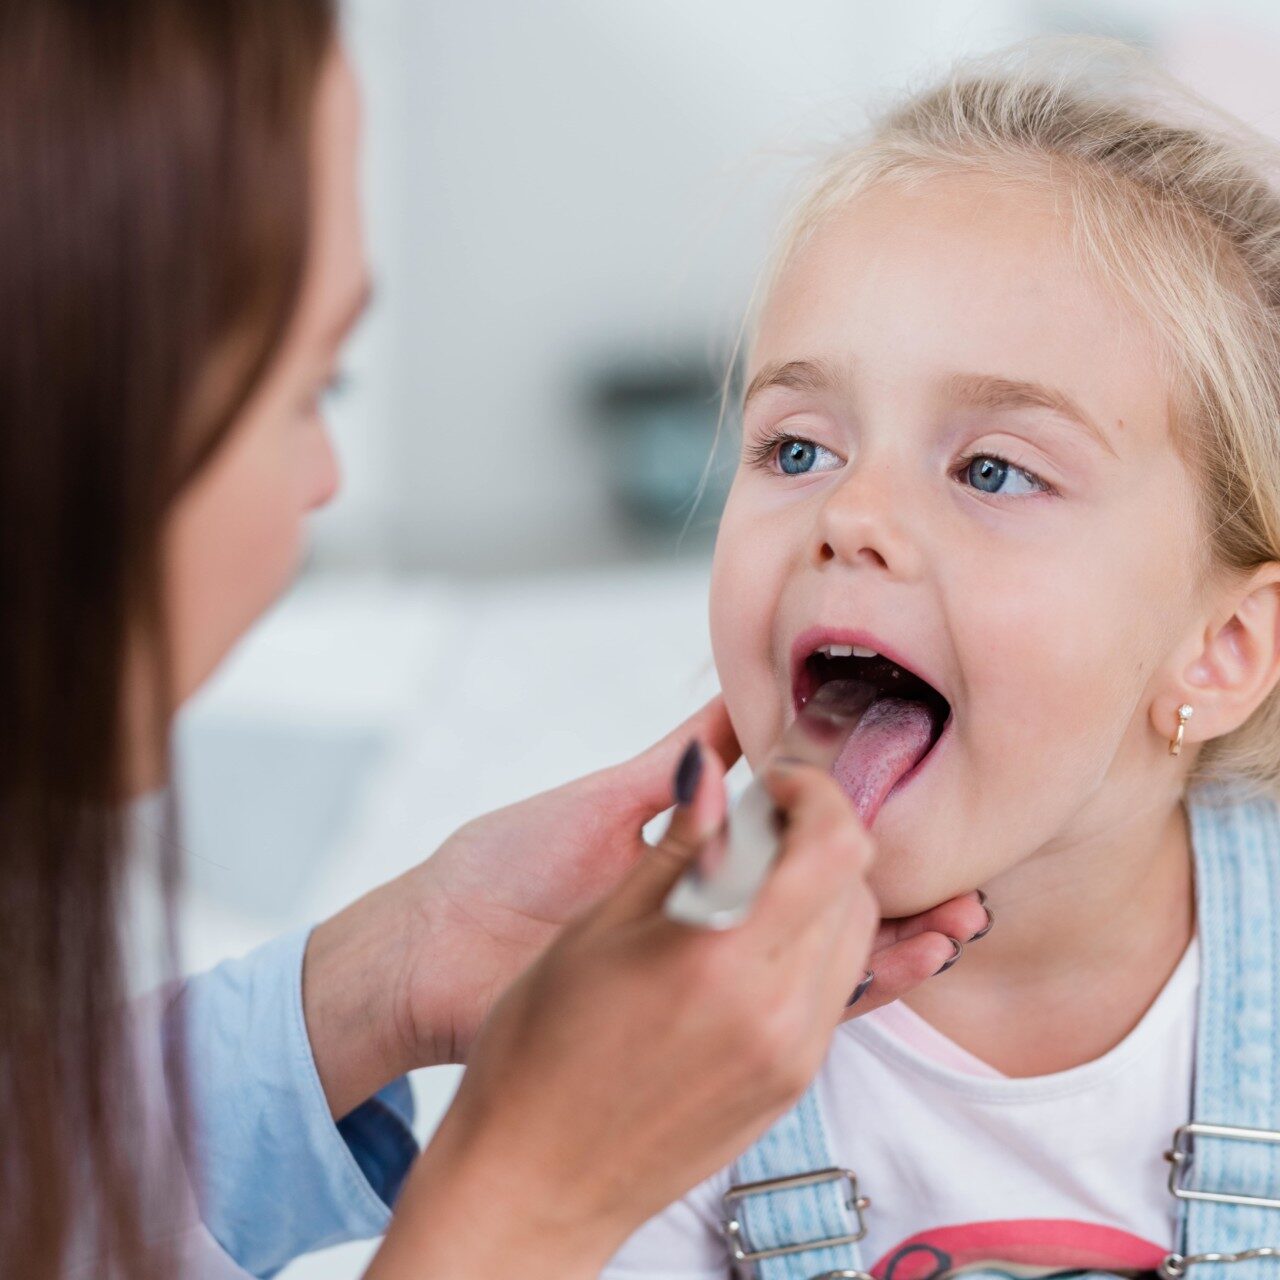 cute-little-blond-girl-opening-mouth-while-sitting-front-clinician-examining-her-throat-with-stell-spatula-min